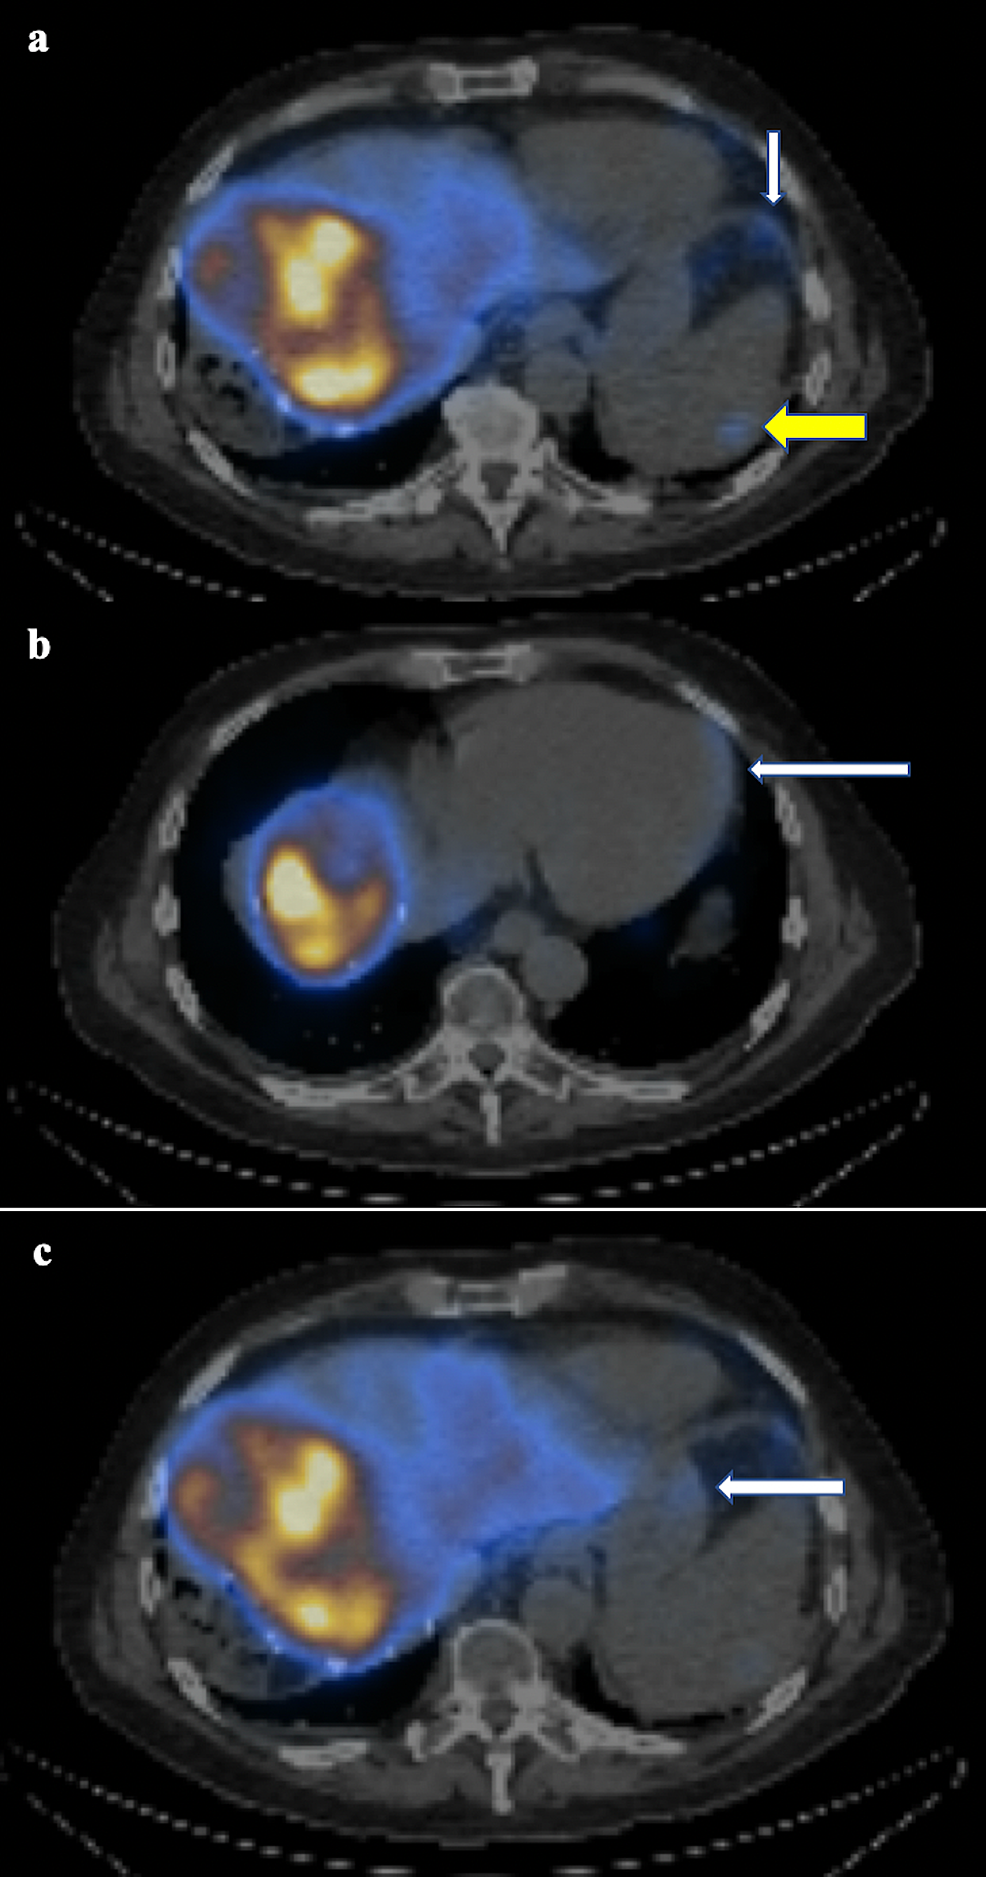 Axial-SPECT-images-demonstrating-small-amounts-of-activity-in-the-diaphragm-(a,-white-arrow),-spleen-(a,-yellow-arrow),-pericardium-(b,-white-arrow),-and-stomach-(c,-white-arrow).